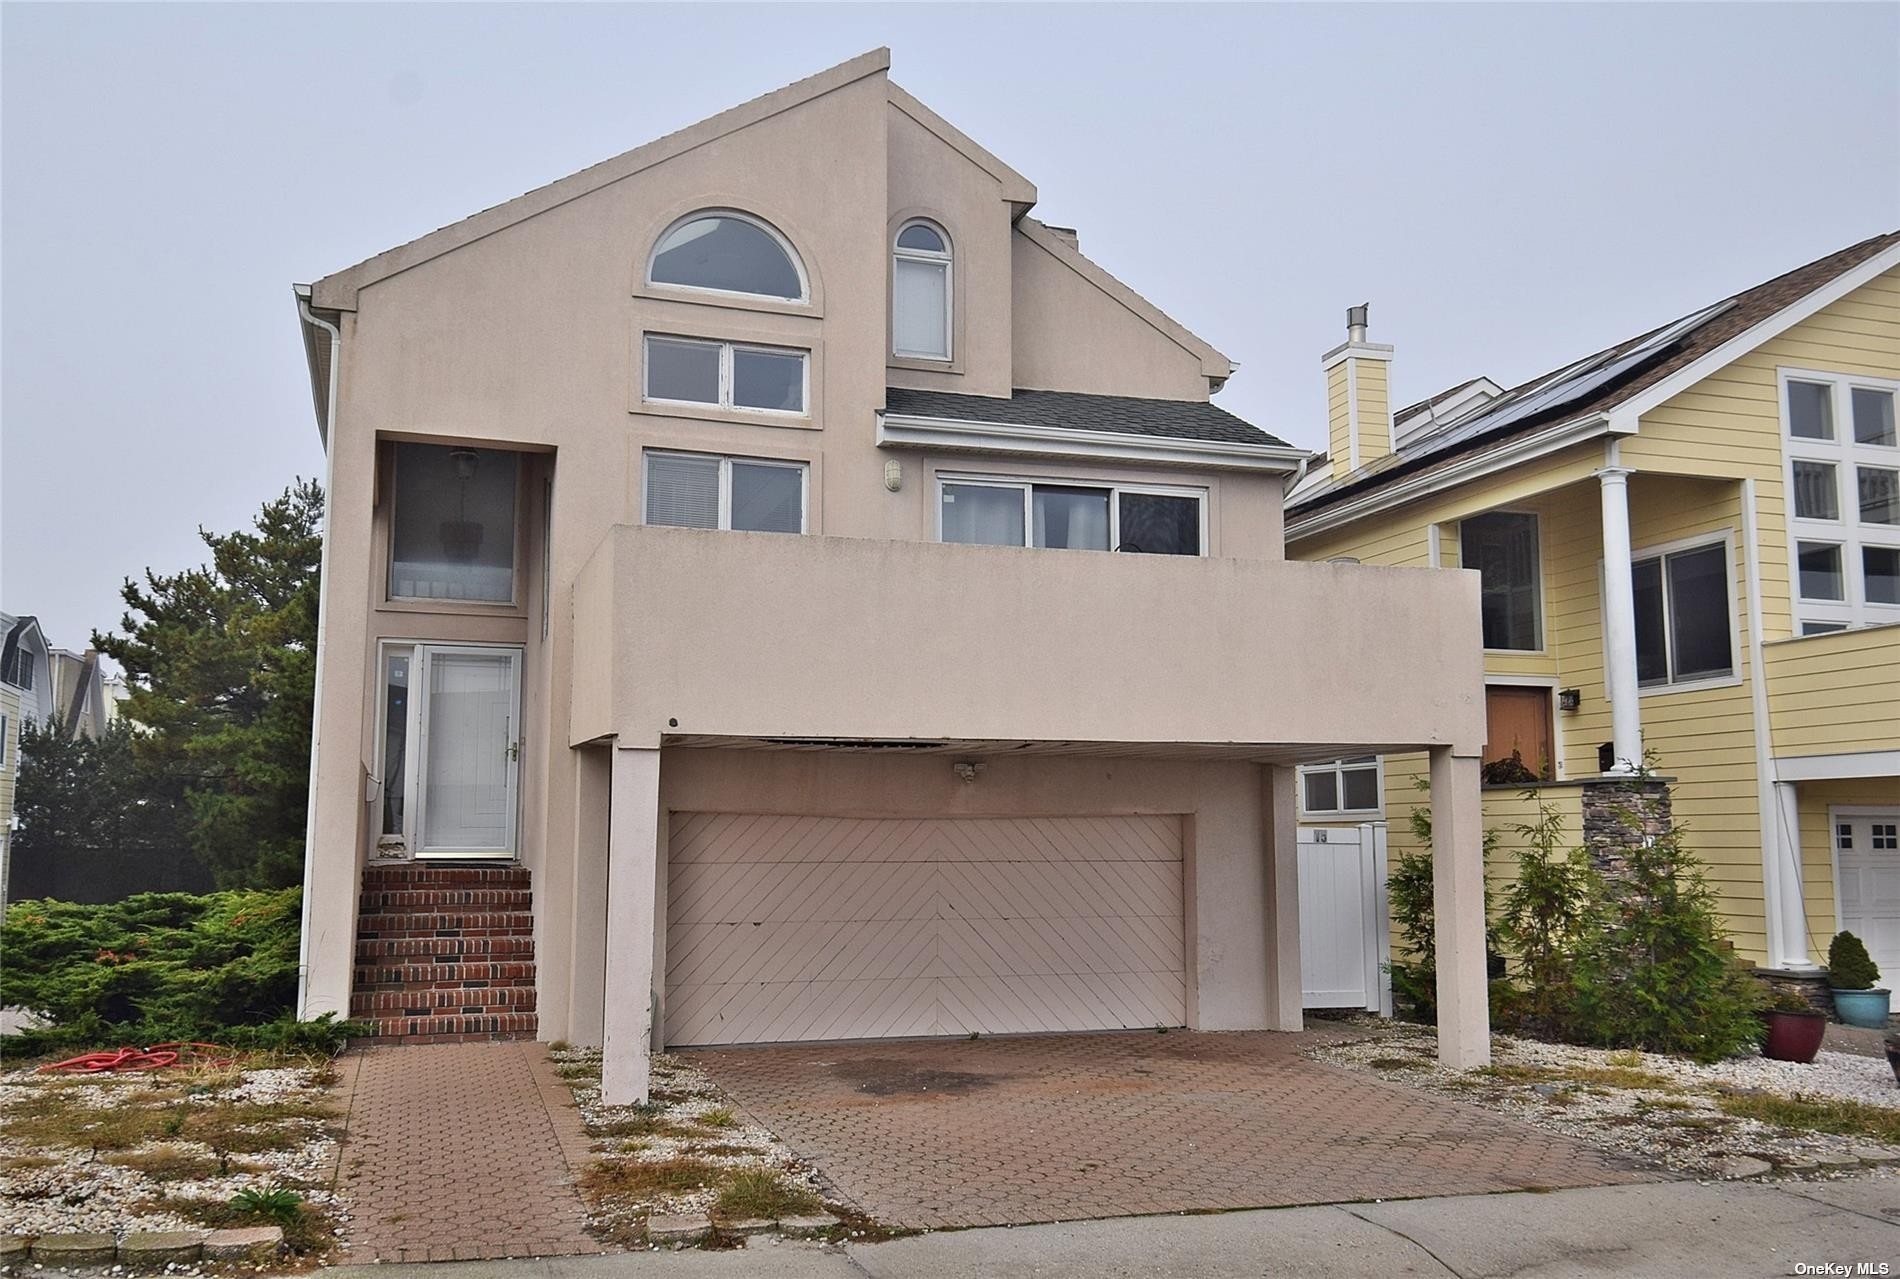 Property at West End, Long Beach, NY 11561